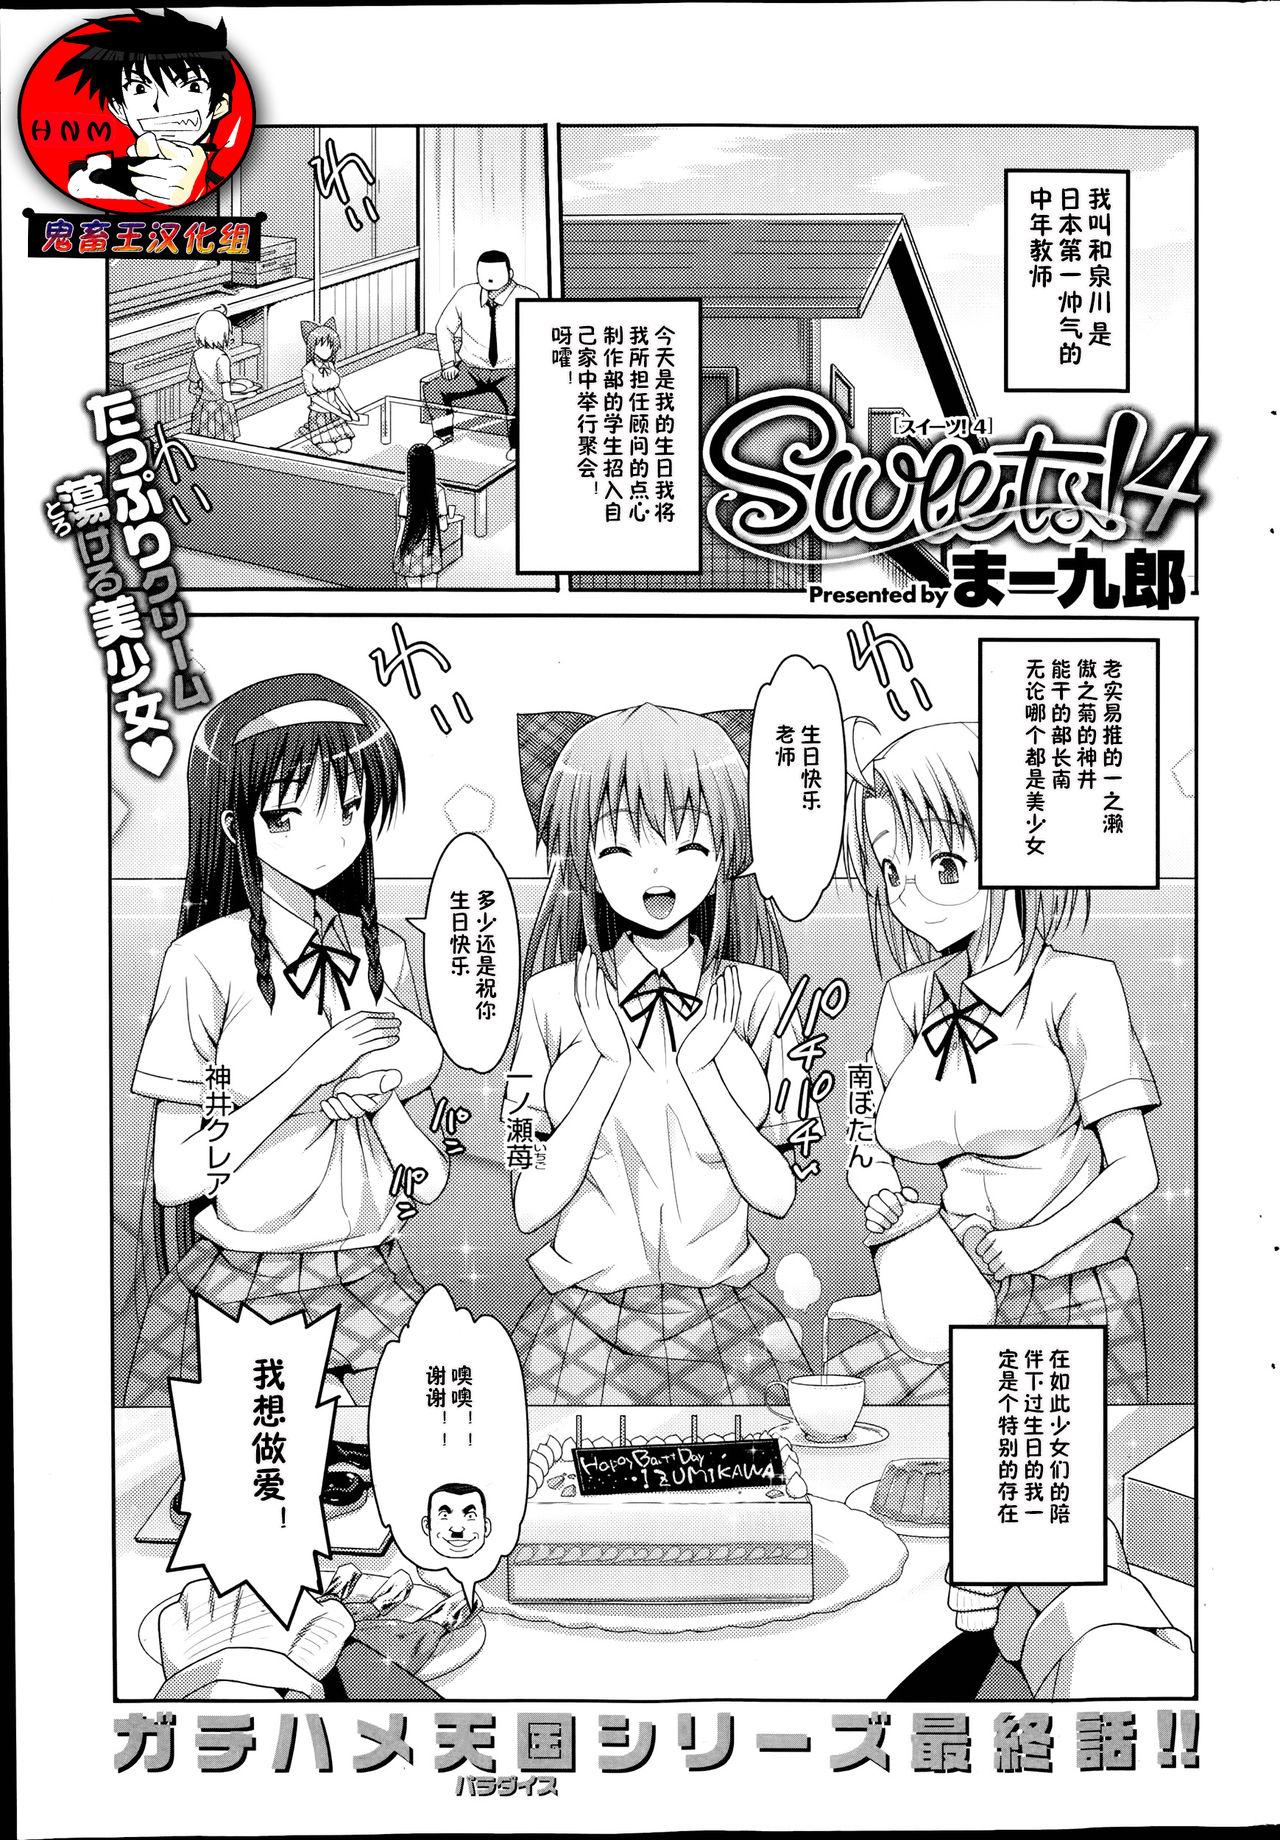 Sweets! Ch. 4 0